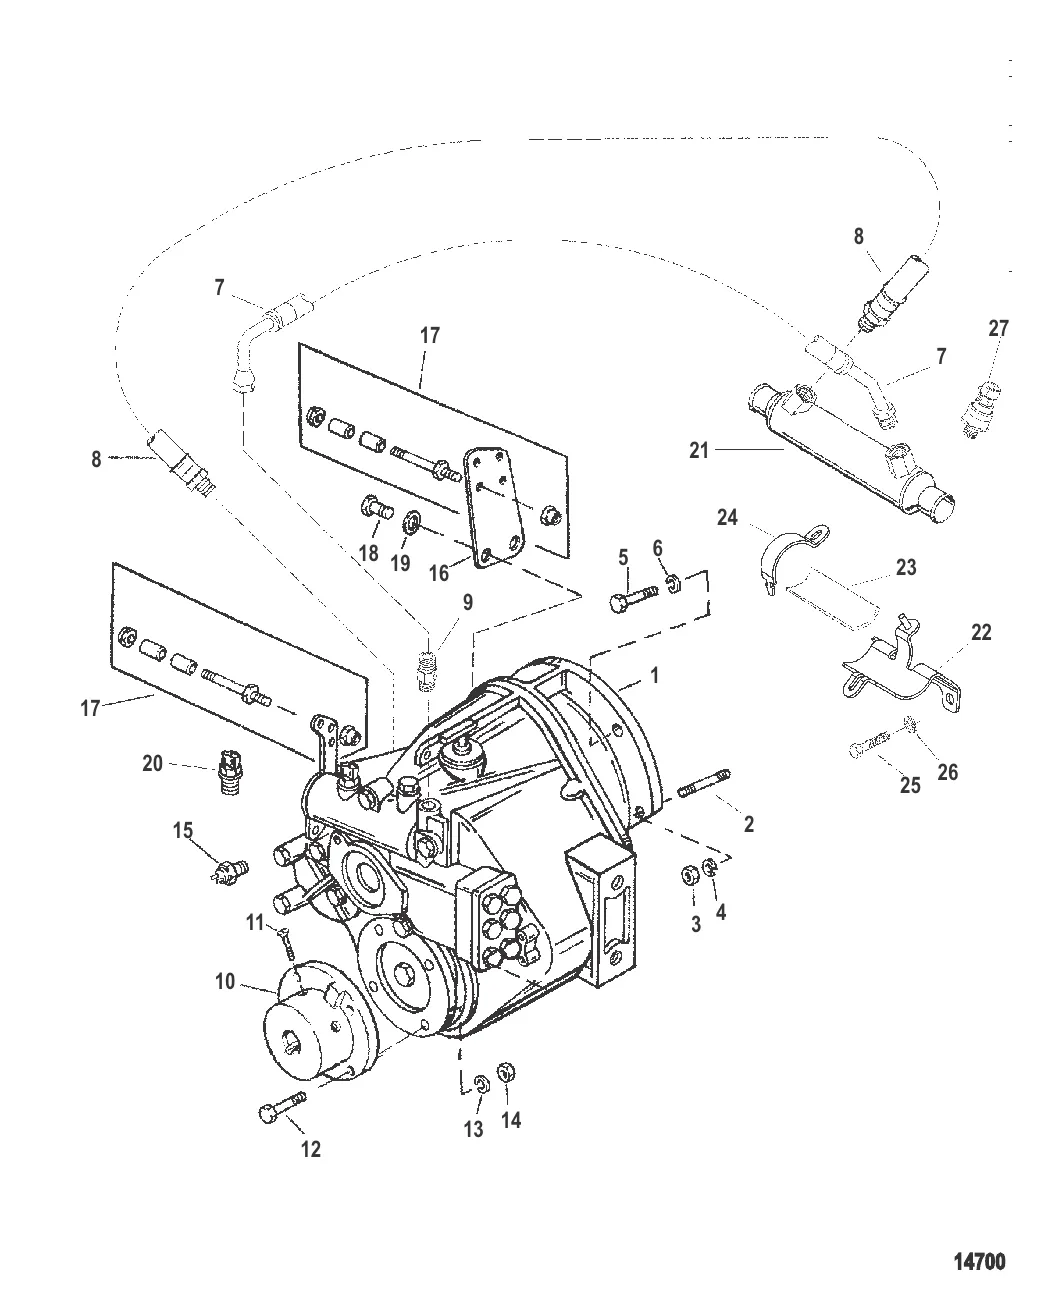 TRANSMISSION AND RELATED PARTS (BORG-WARNER 5000)